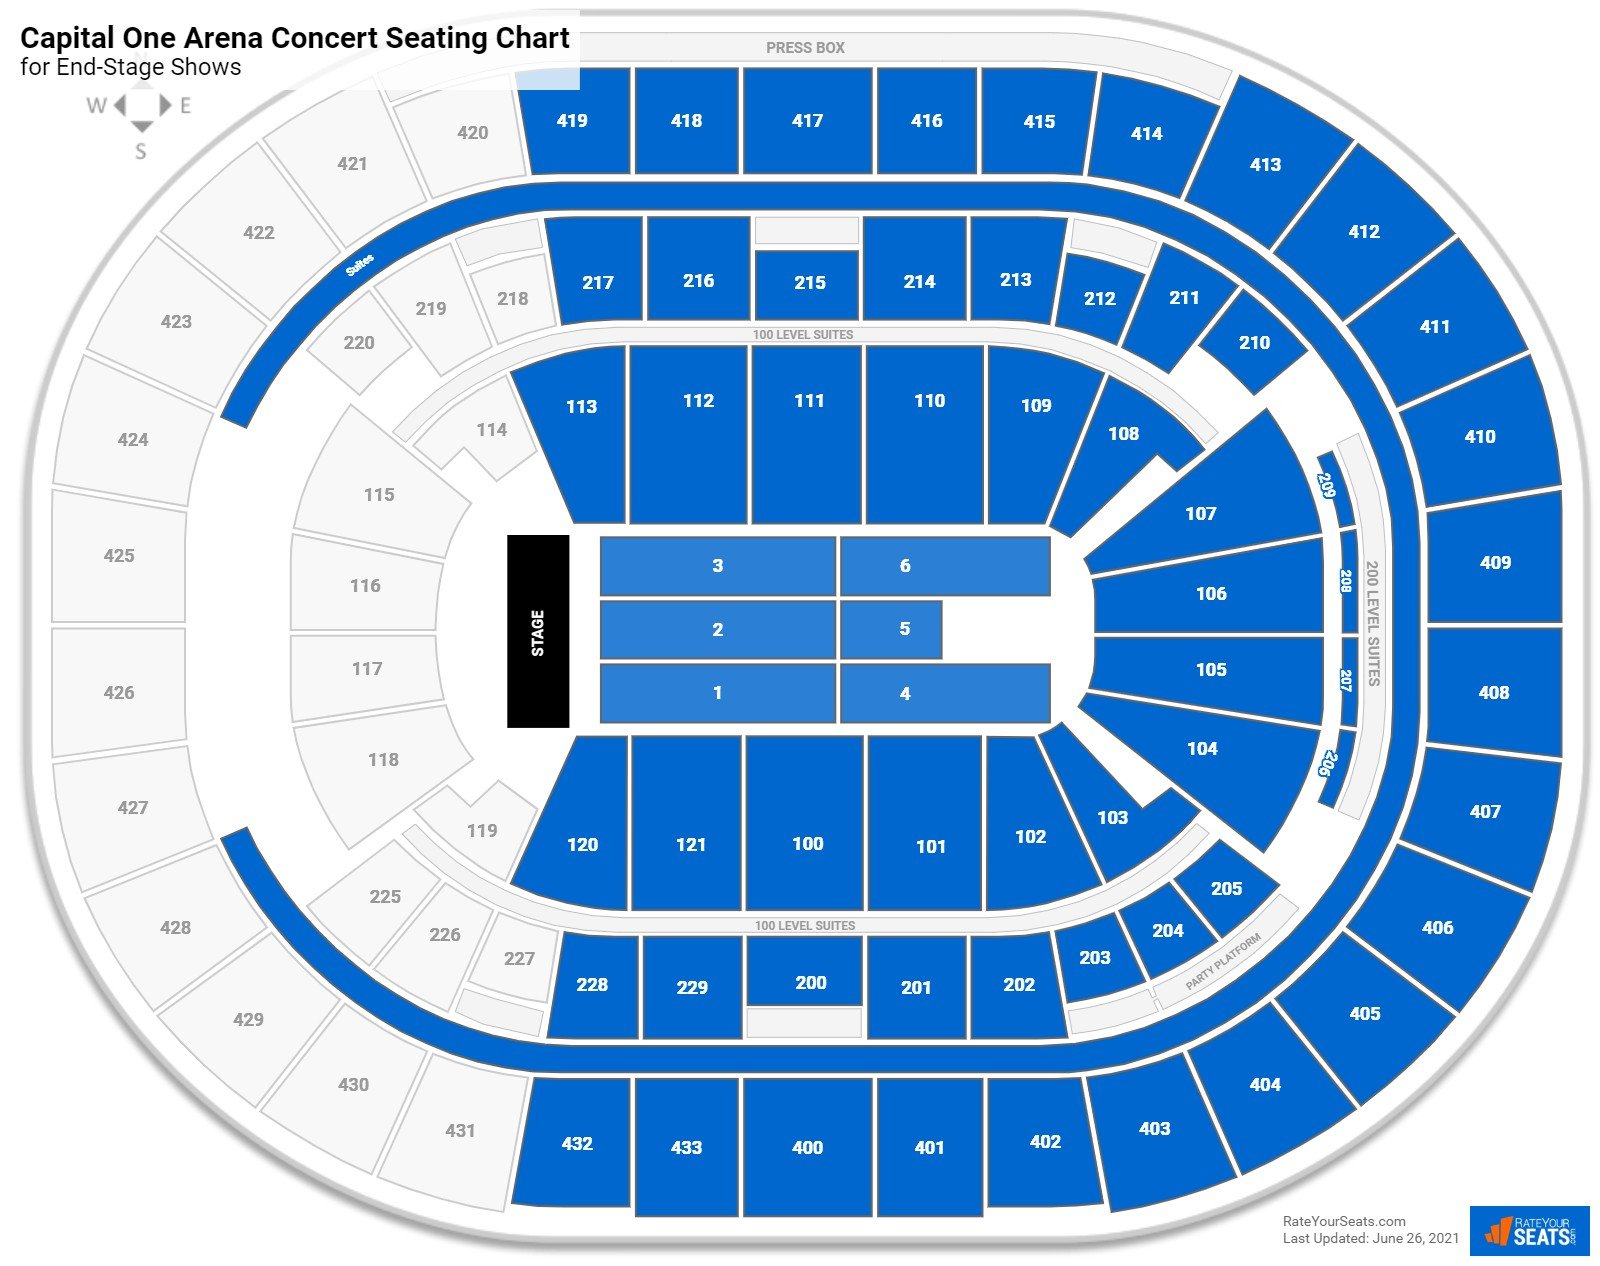 Capital One Arena Seating Charts For Concerts Rateyourseats Com